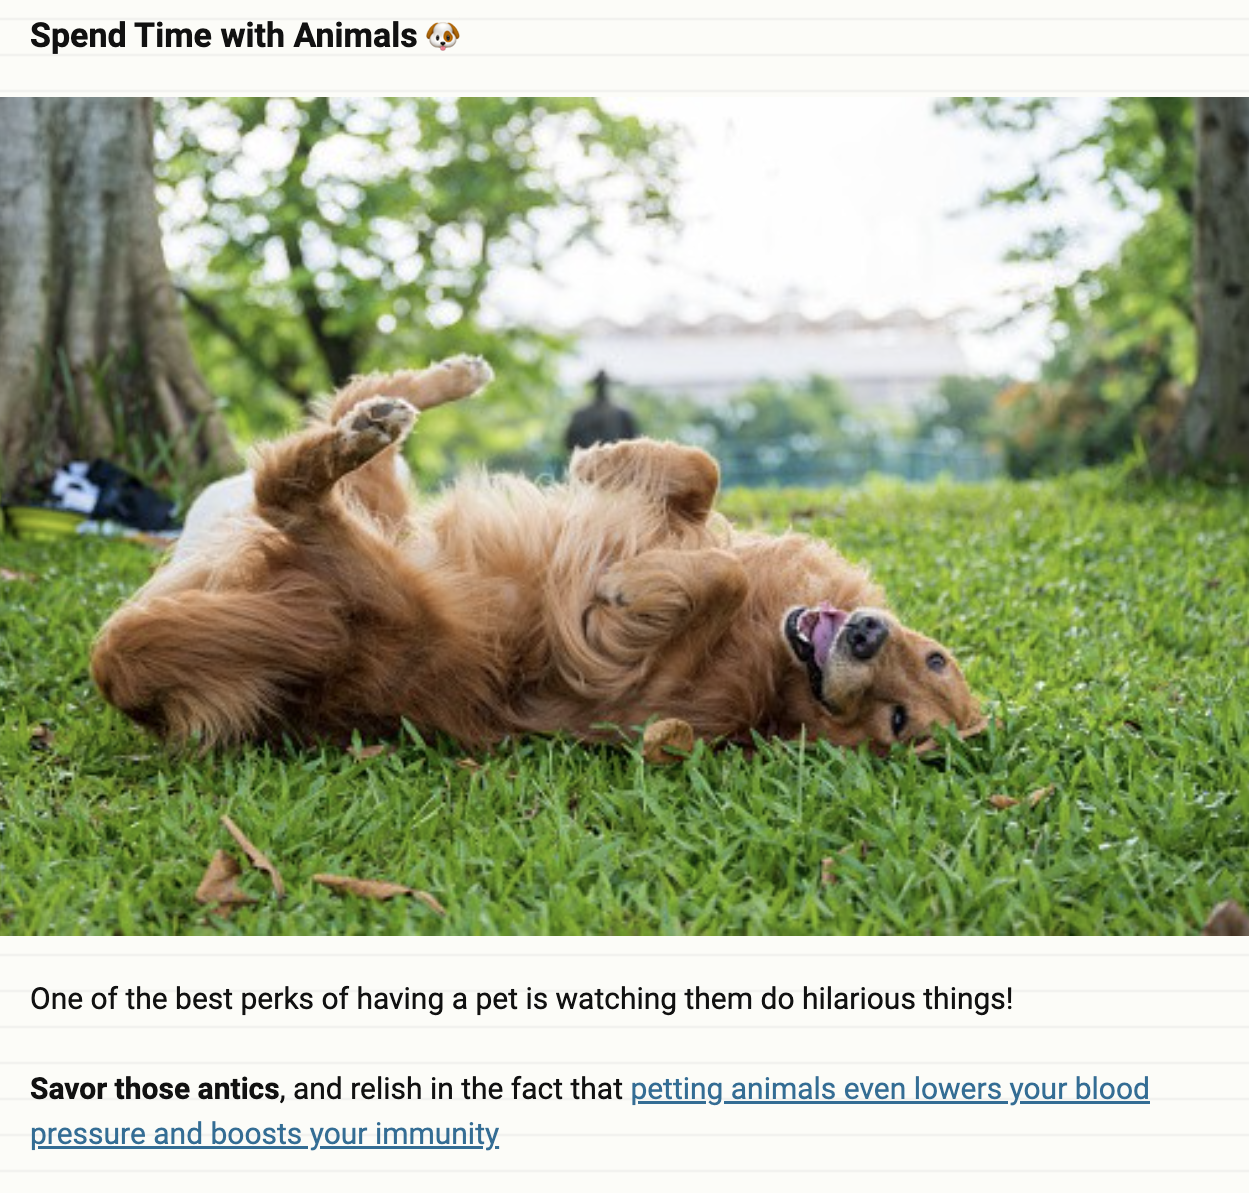 Dog rolling in grass with written description about perks of having pets